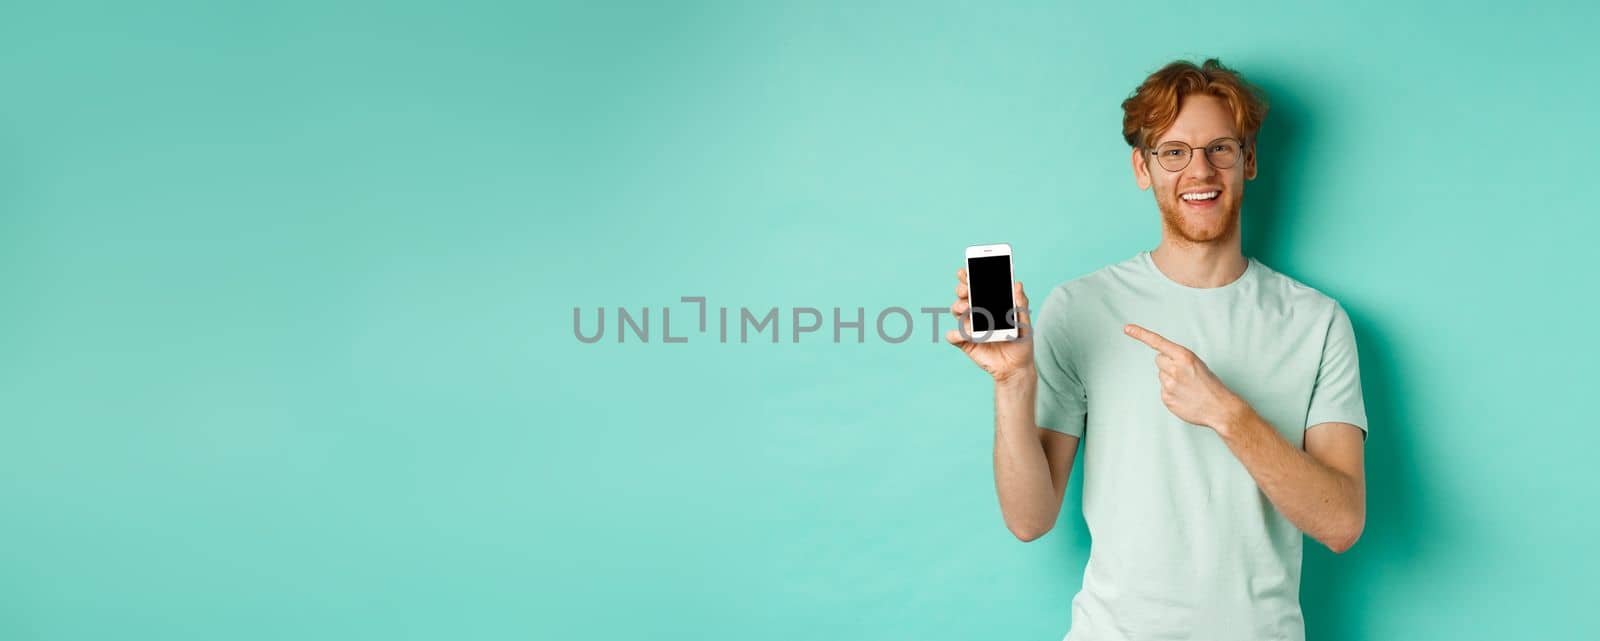 Attractive young man with red beard and hair pointing finger at blank smartphone screen, showing online promotion or app, smiling at camera, turquoise background.